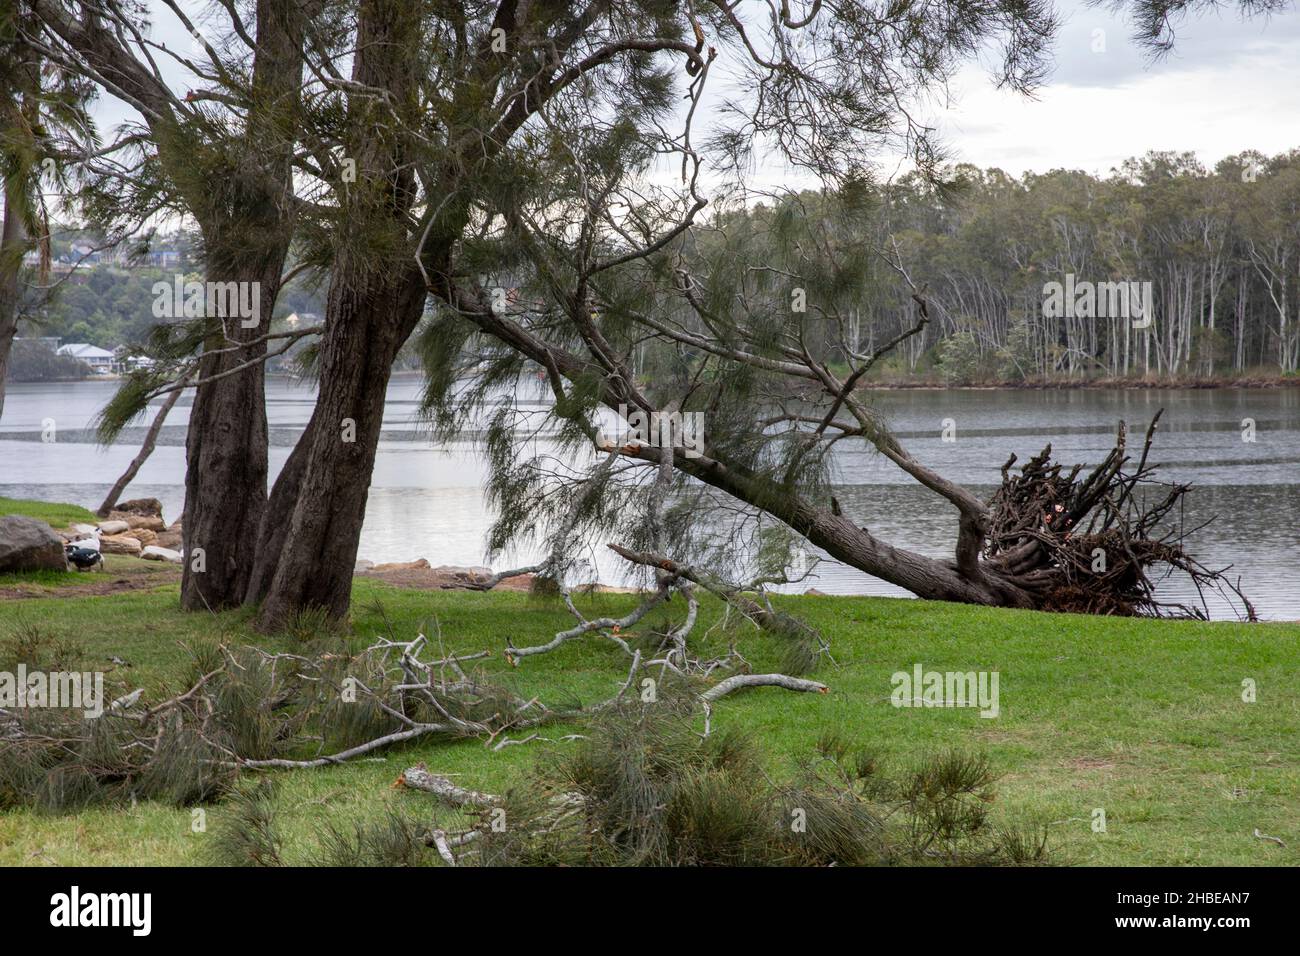 Sydney northern beaches hit by freak storm, power lines down, trees down, one fatality, trees around Narrabeen Lake uprooted,Narrabeen area,NSW Stock Photo